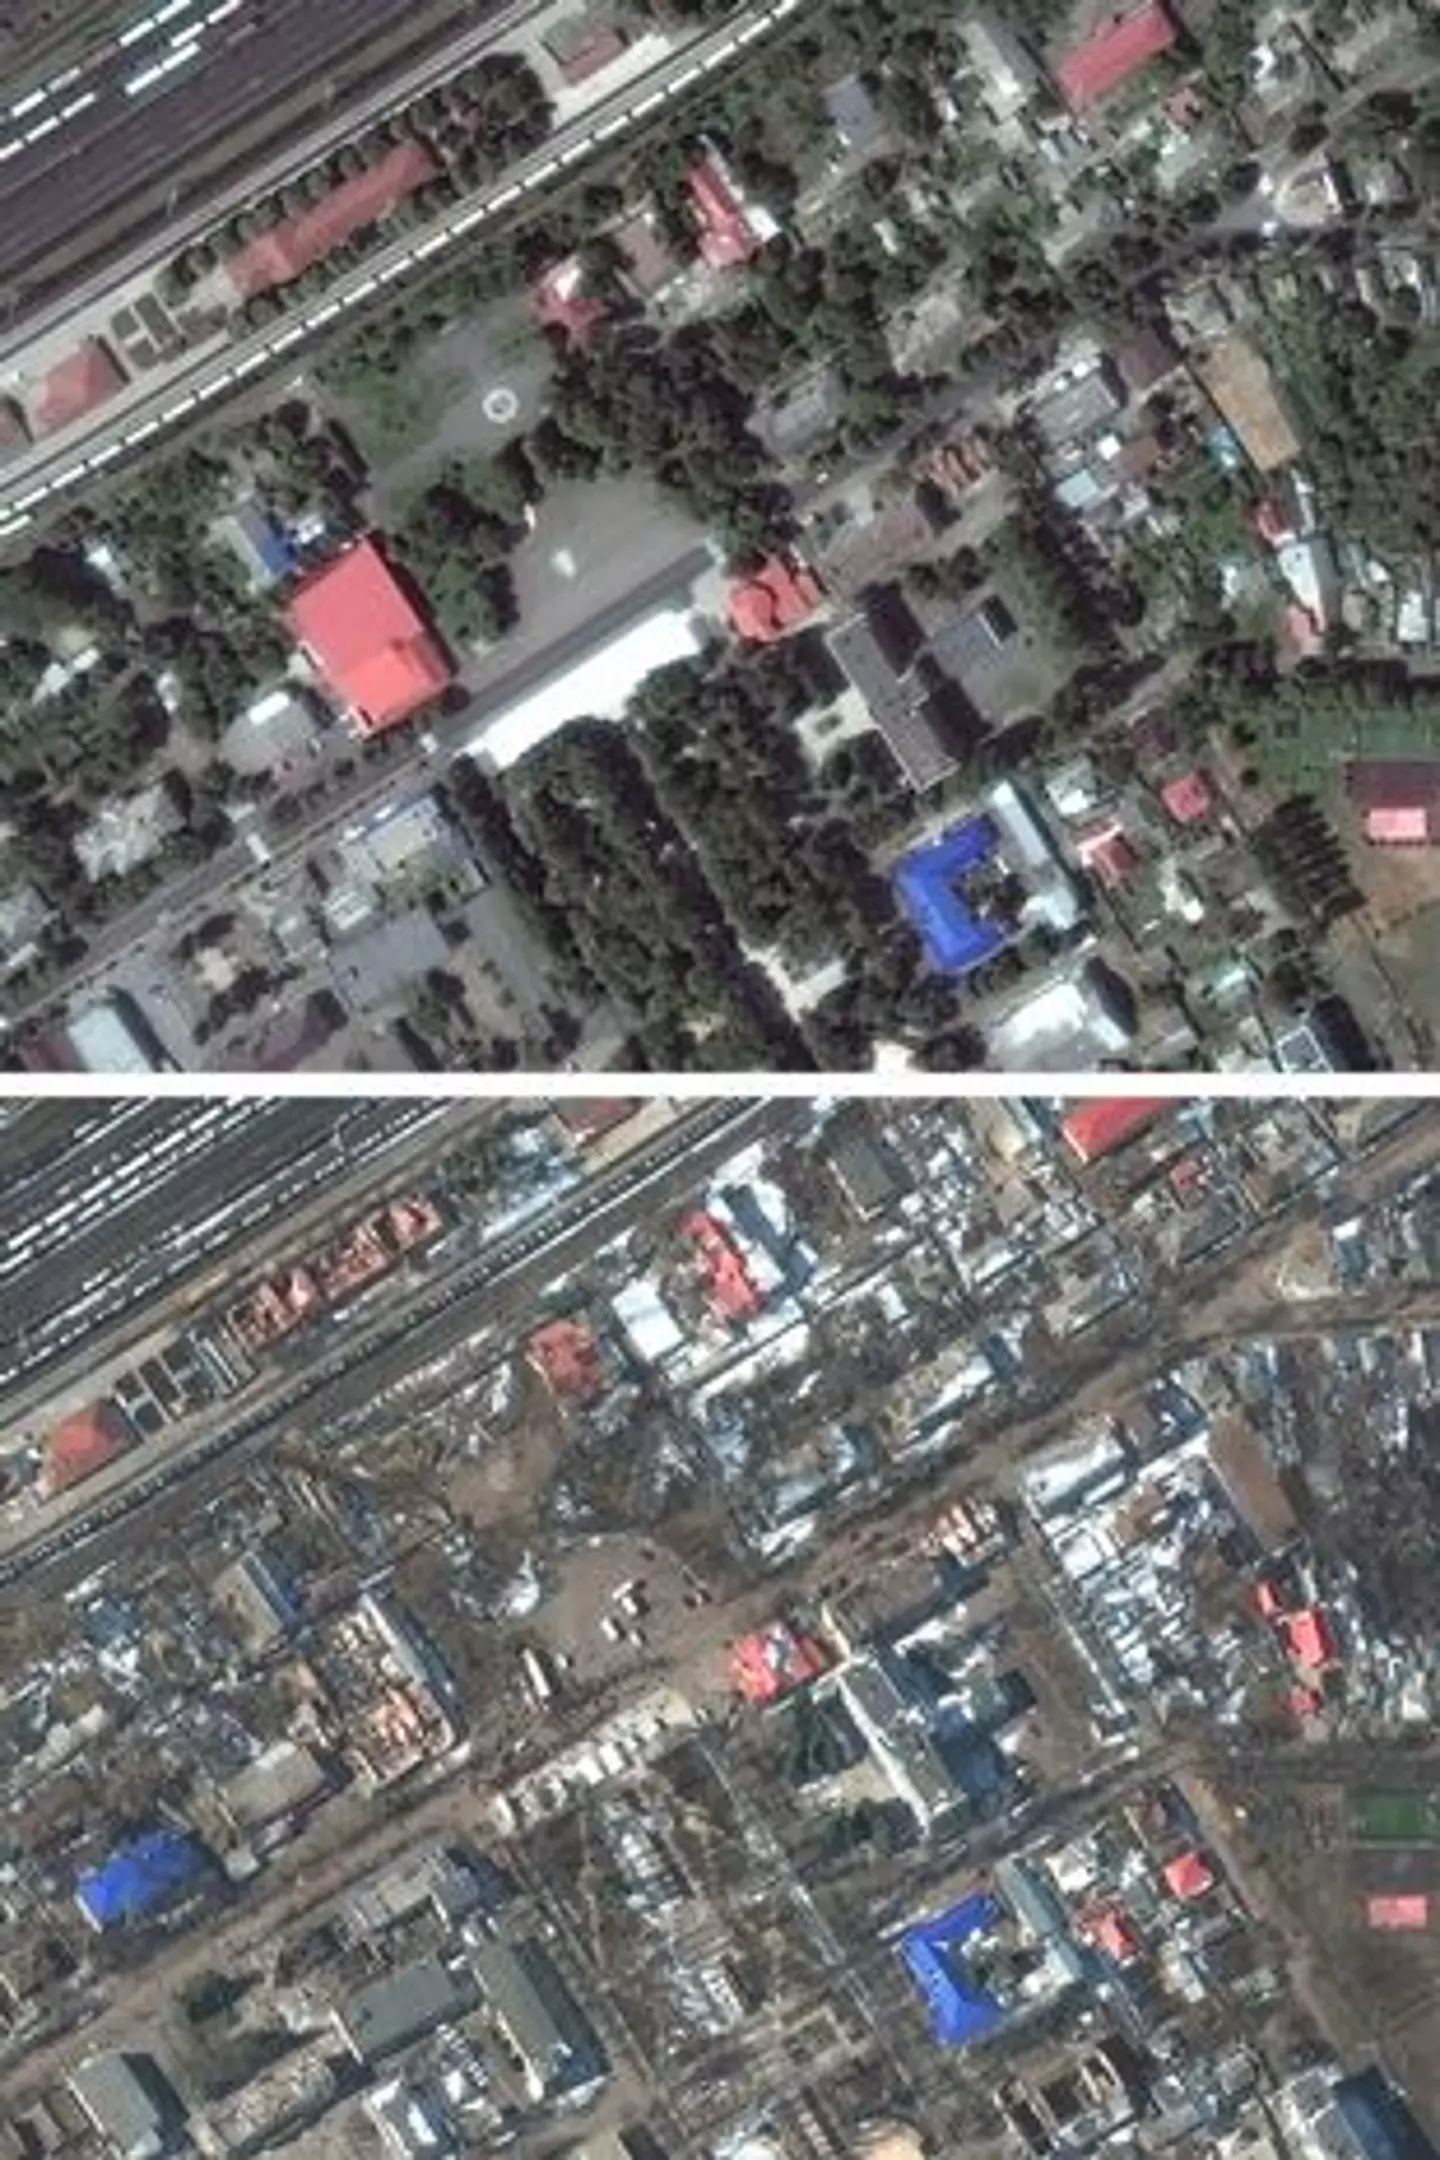 Bbefore and after comparison of central Sumy, Ukraine.